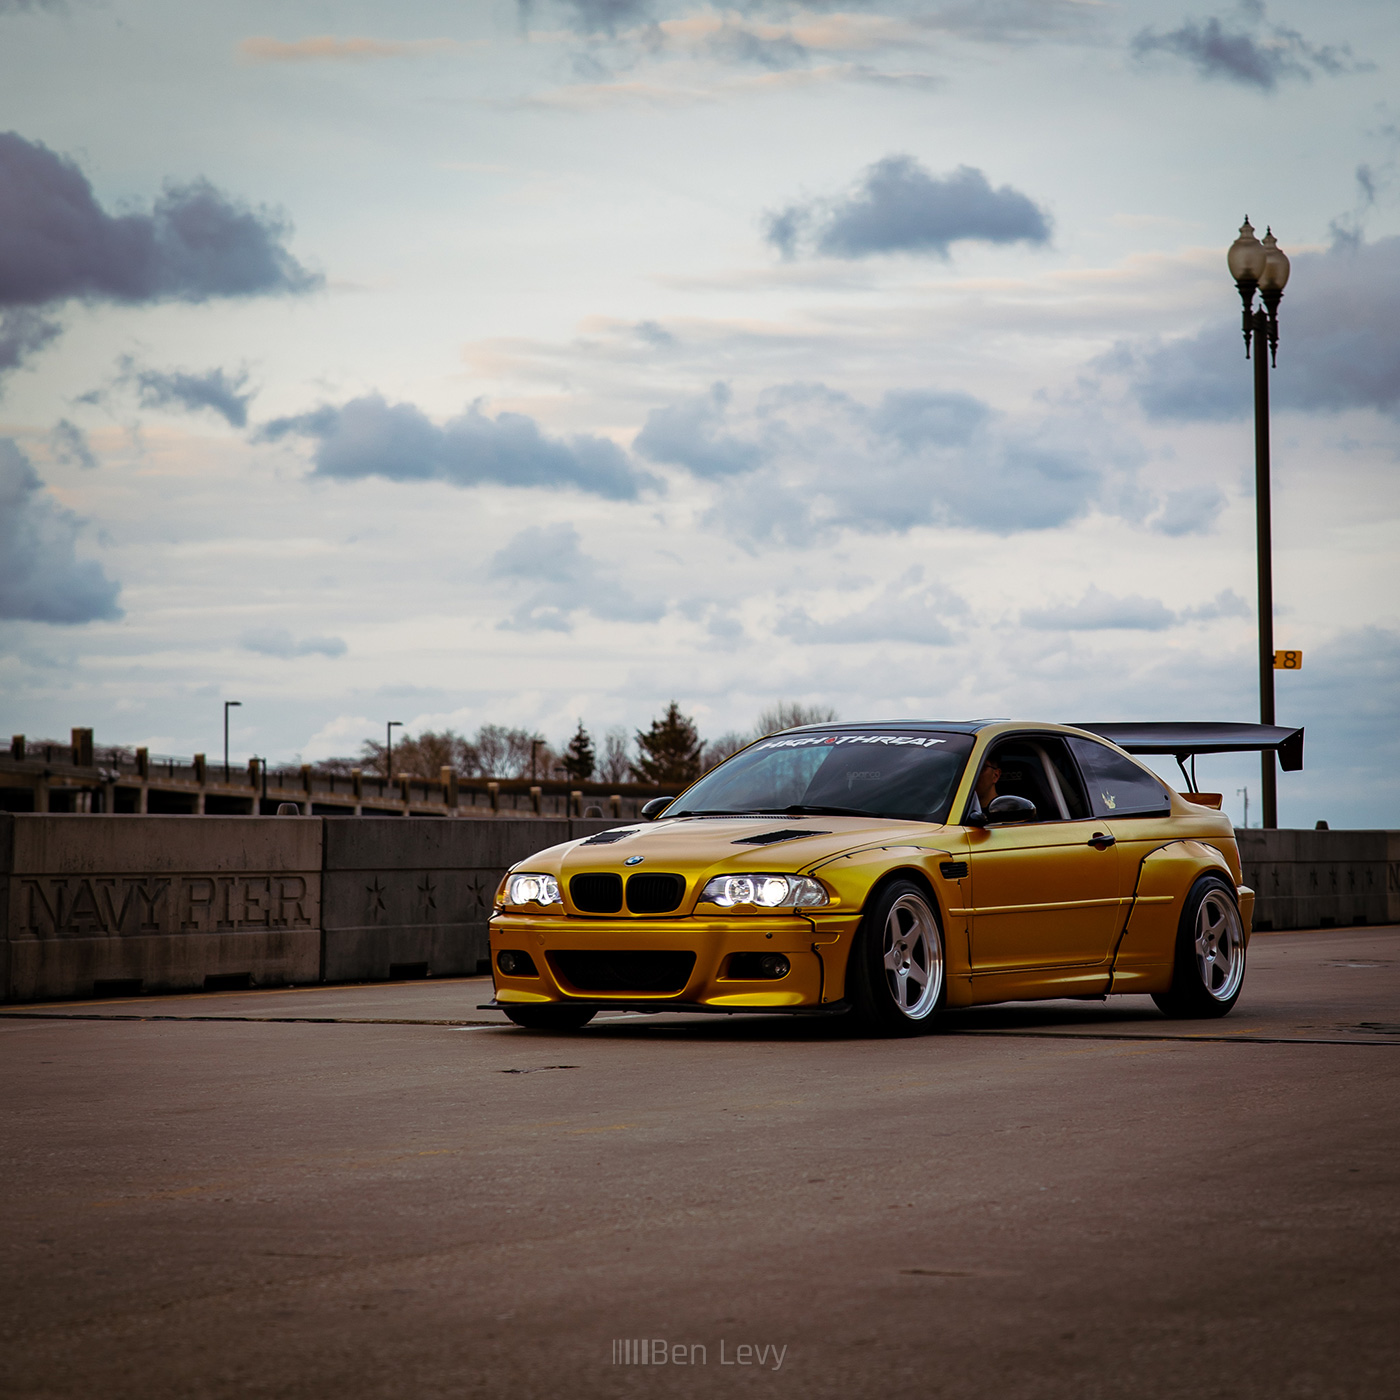 Golden BMW M3 on the street by Navy Pier in Chicago